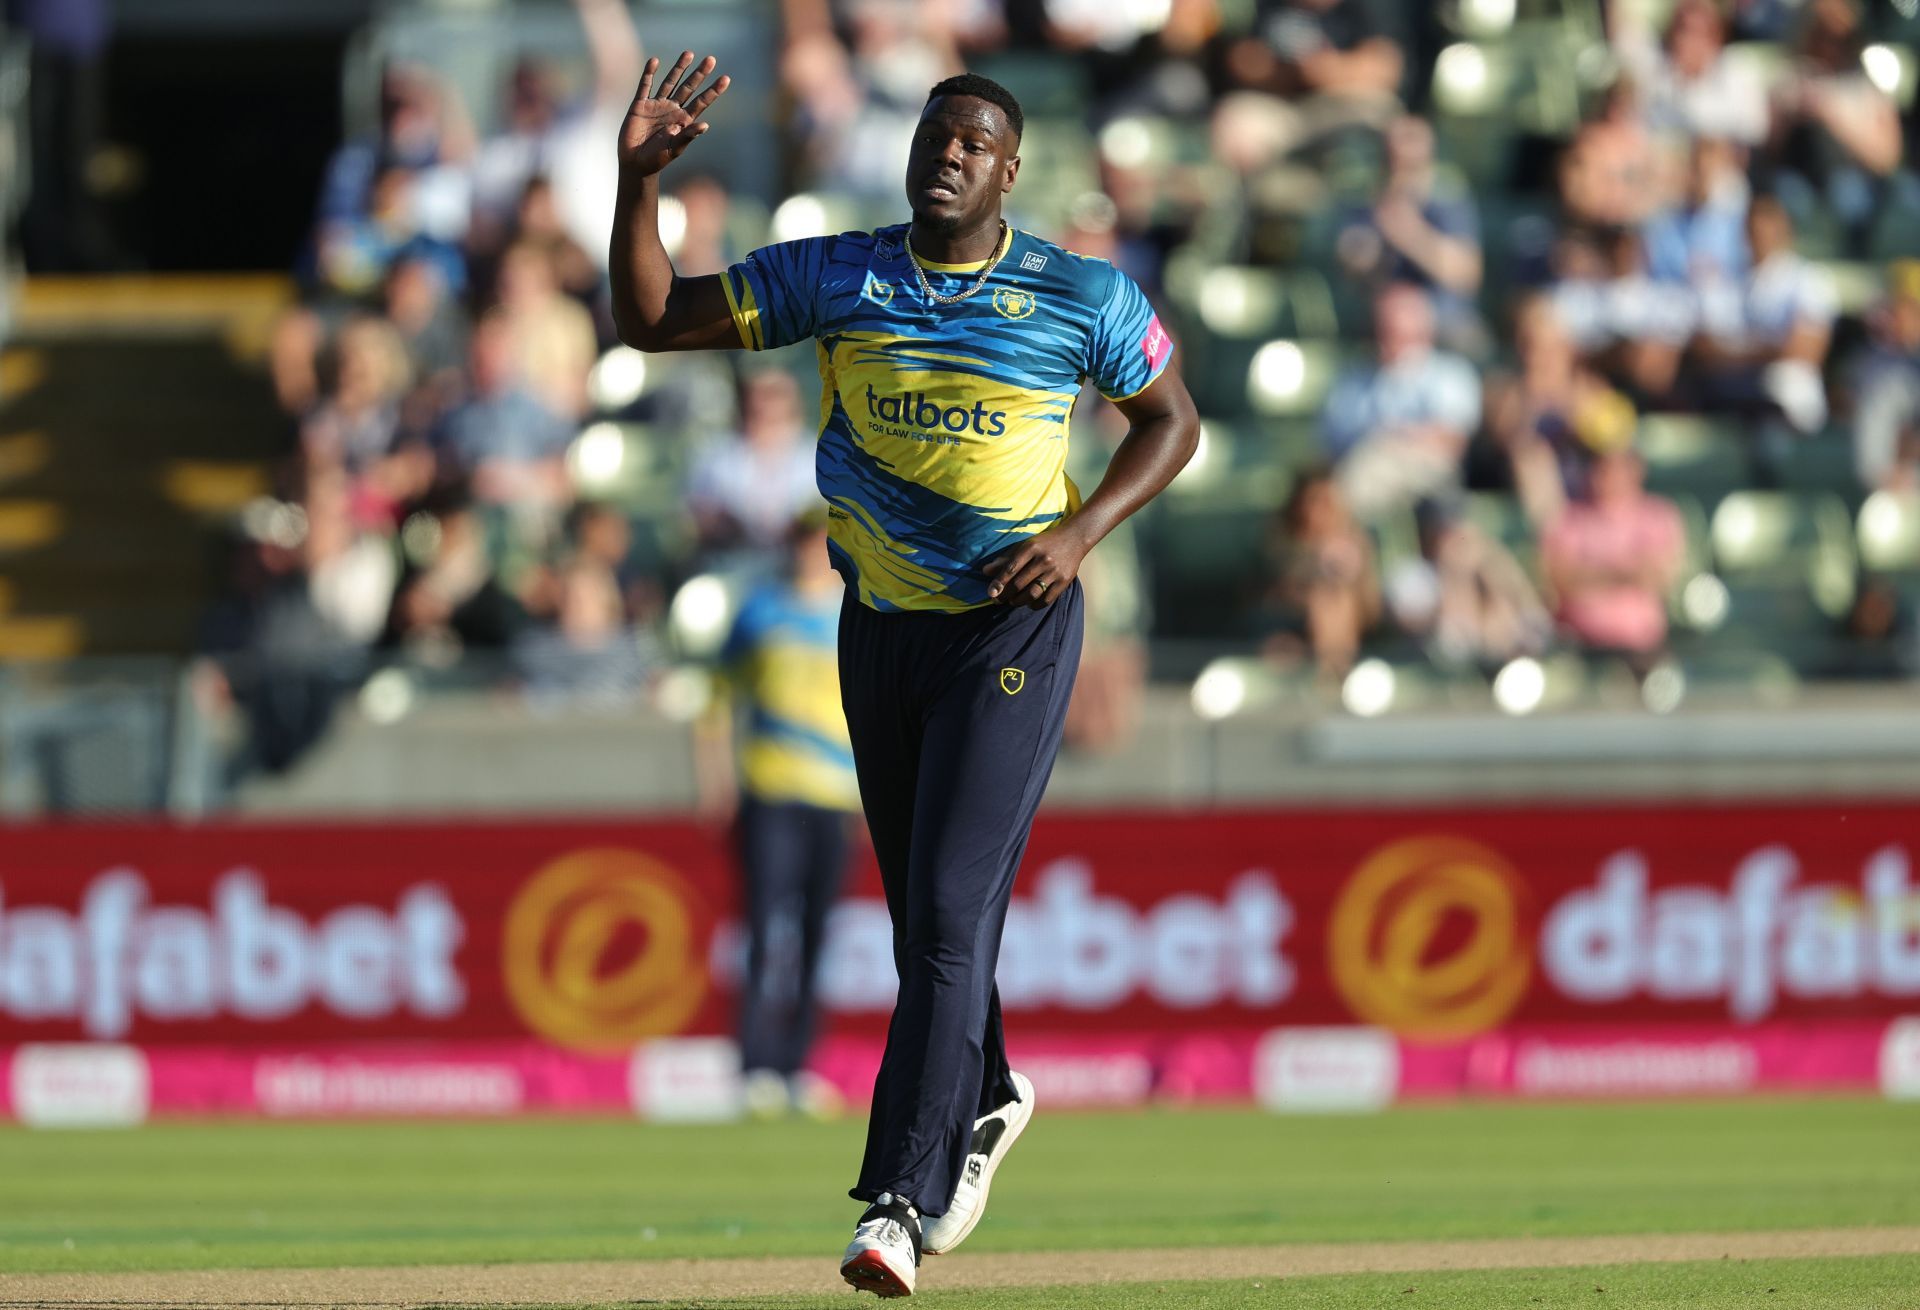 Carlos Brathwaite is the current leading wicket-taker in the LPL 2022